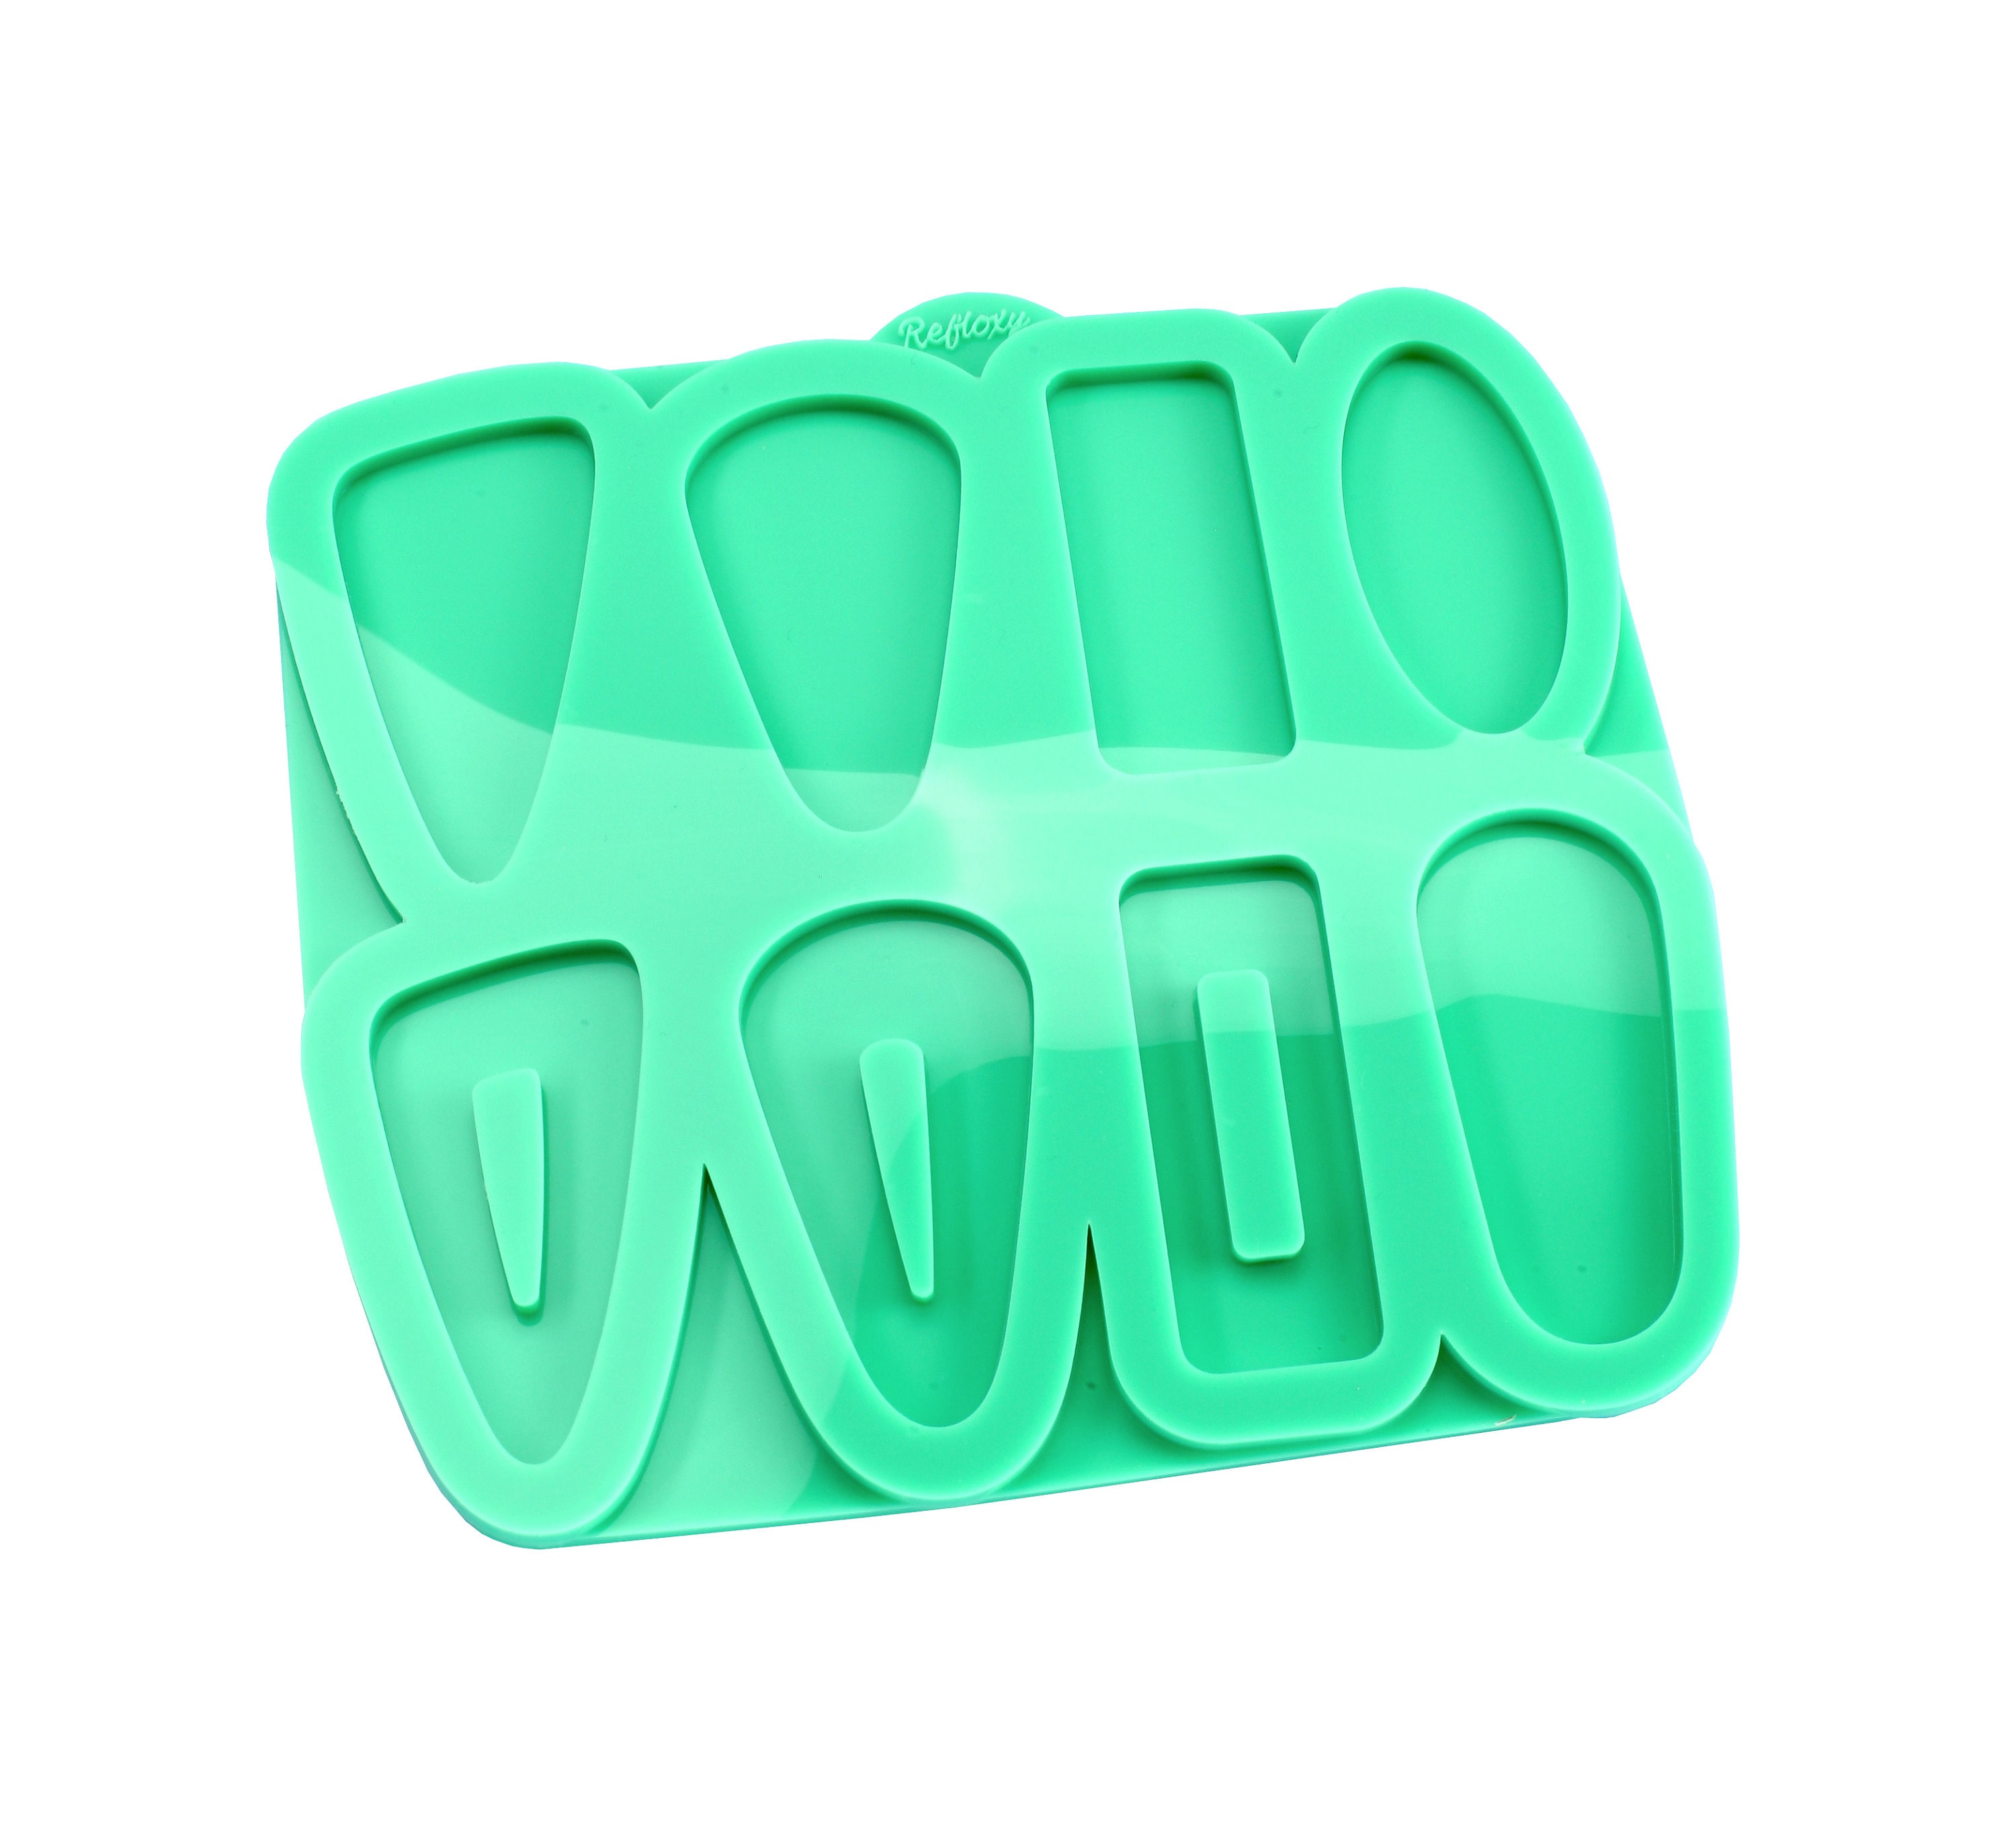 RESIN WAVY RECTANGLE Bead Mold, Silicone Mold to make 1-1/2 x 1 wavy